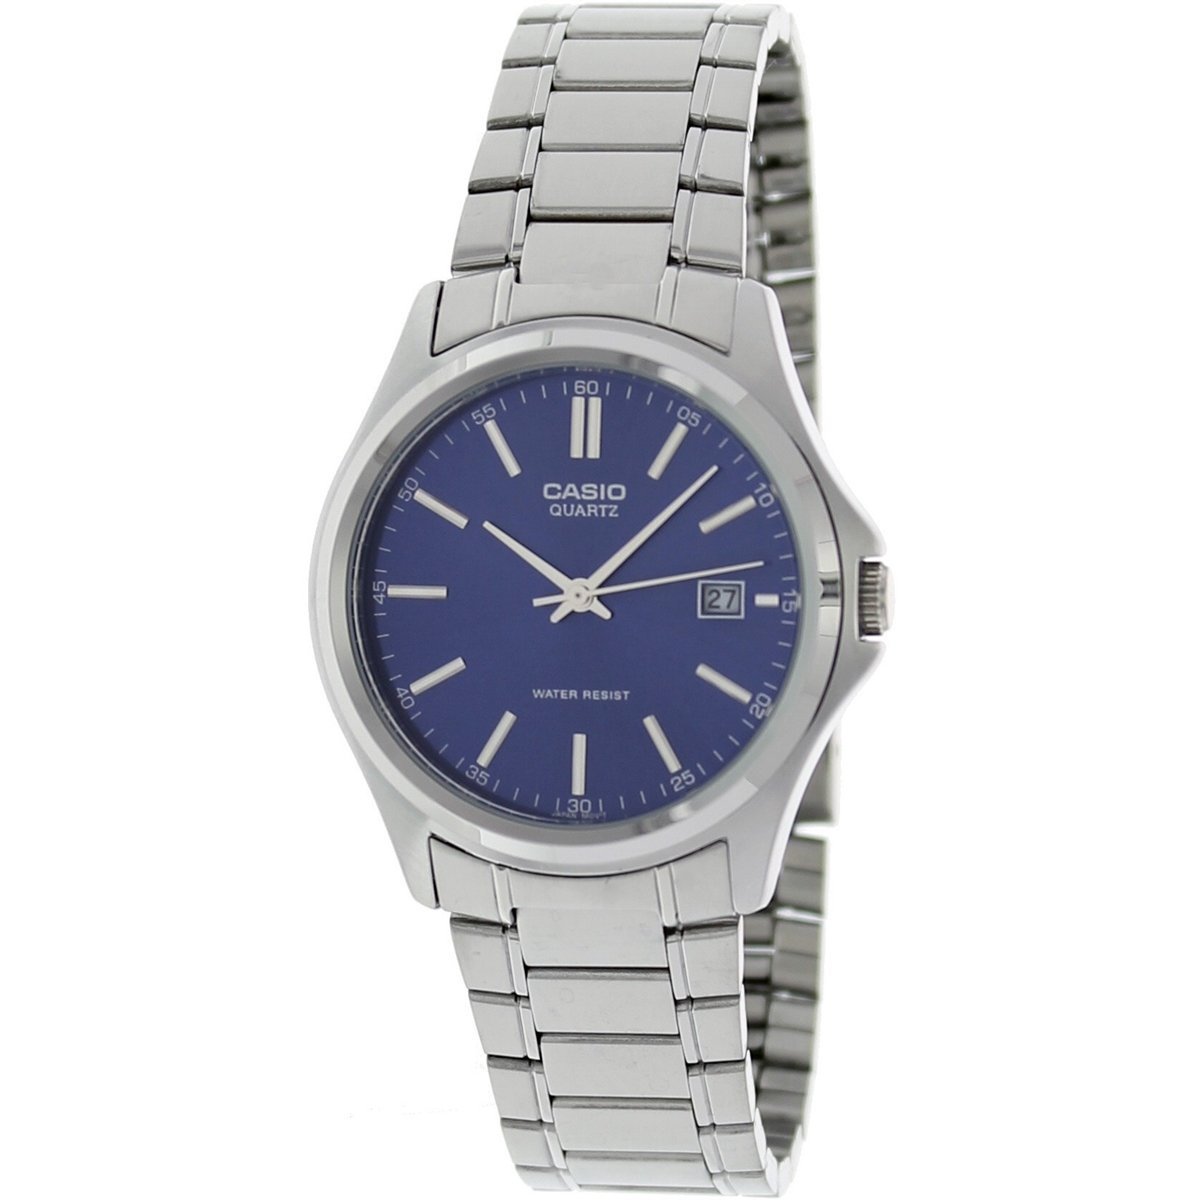 Casio Men's MTP-1183A-2A 'Classic' Stainless Steel Watch - BLue | eBay